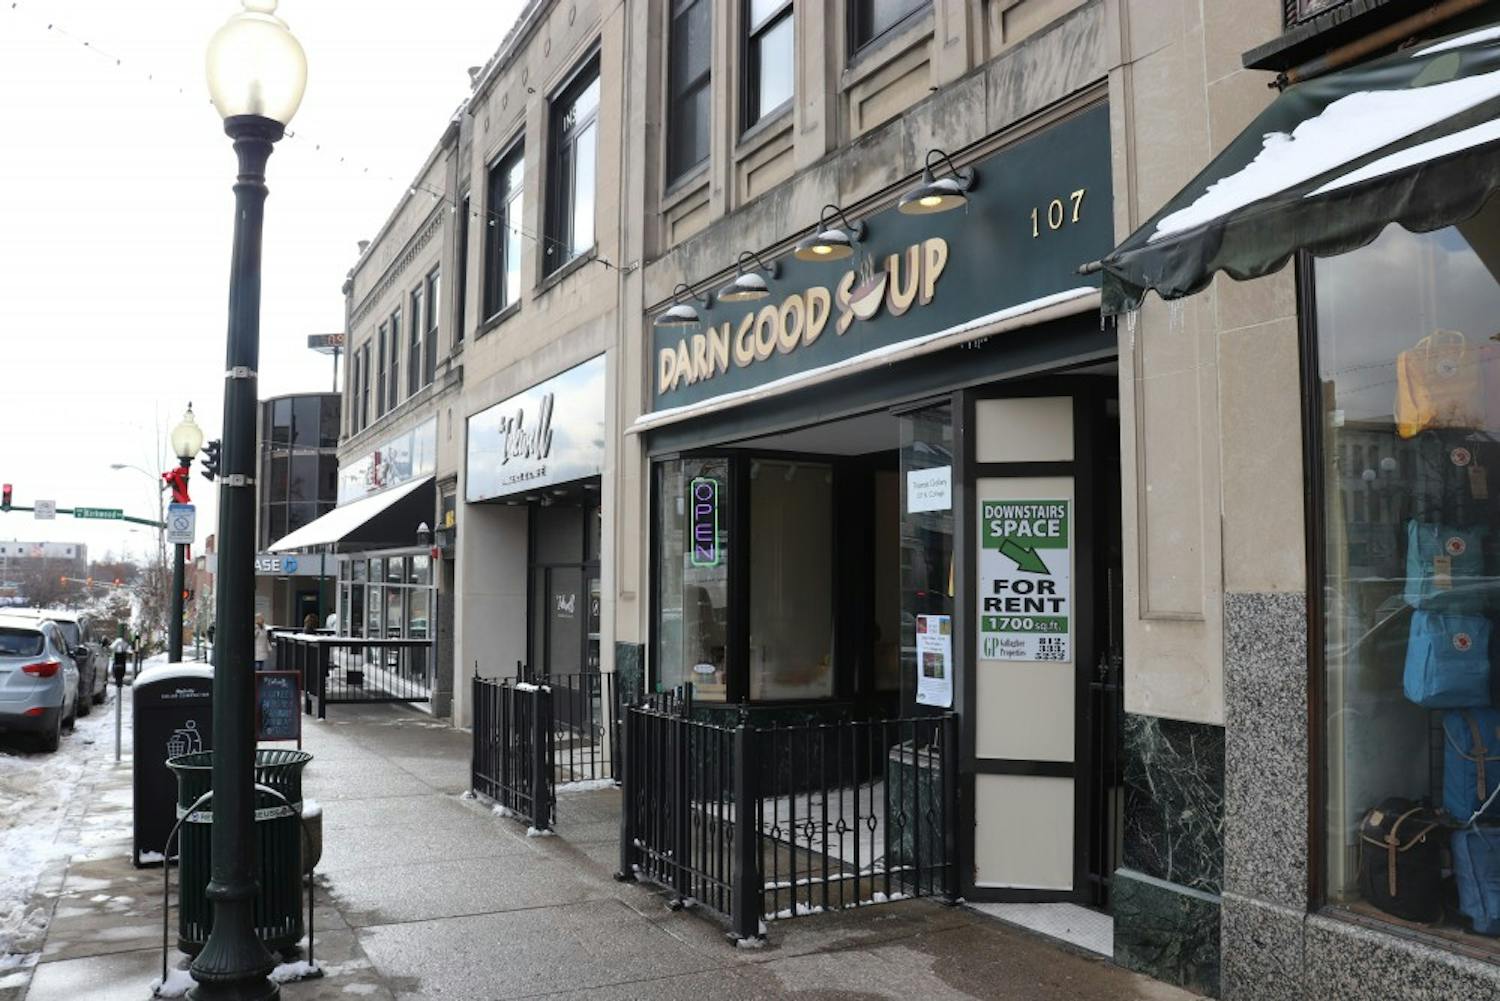 Darn Good Soup is an eatery where local soup-lovers can find many different styles of soup. The establishment is open from 11 a.m. to 7:30 p.m. every day.
